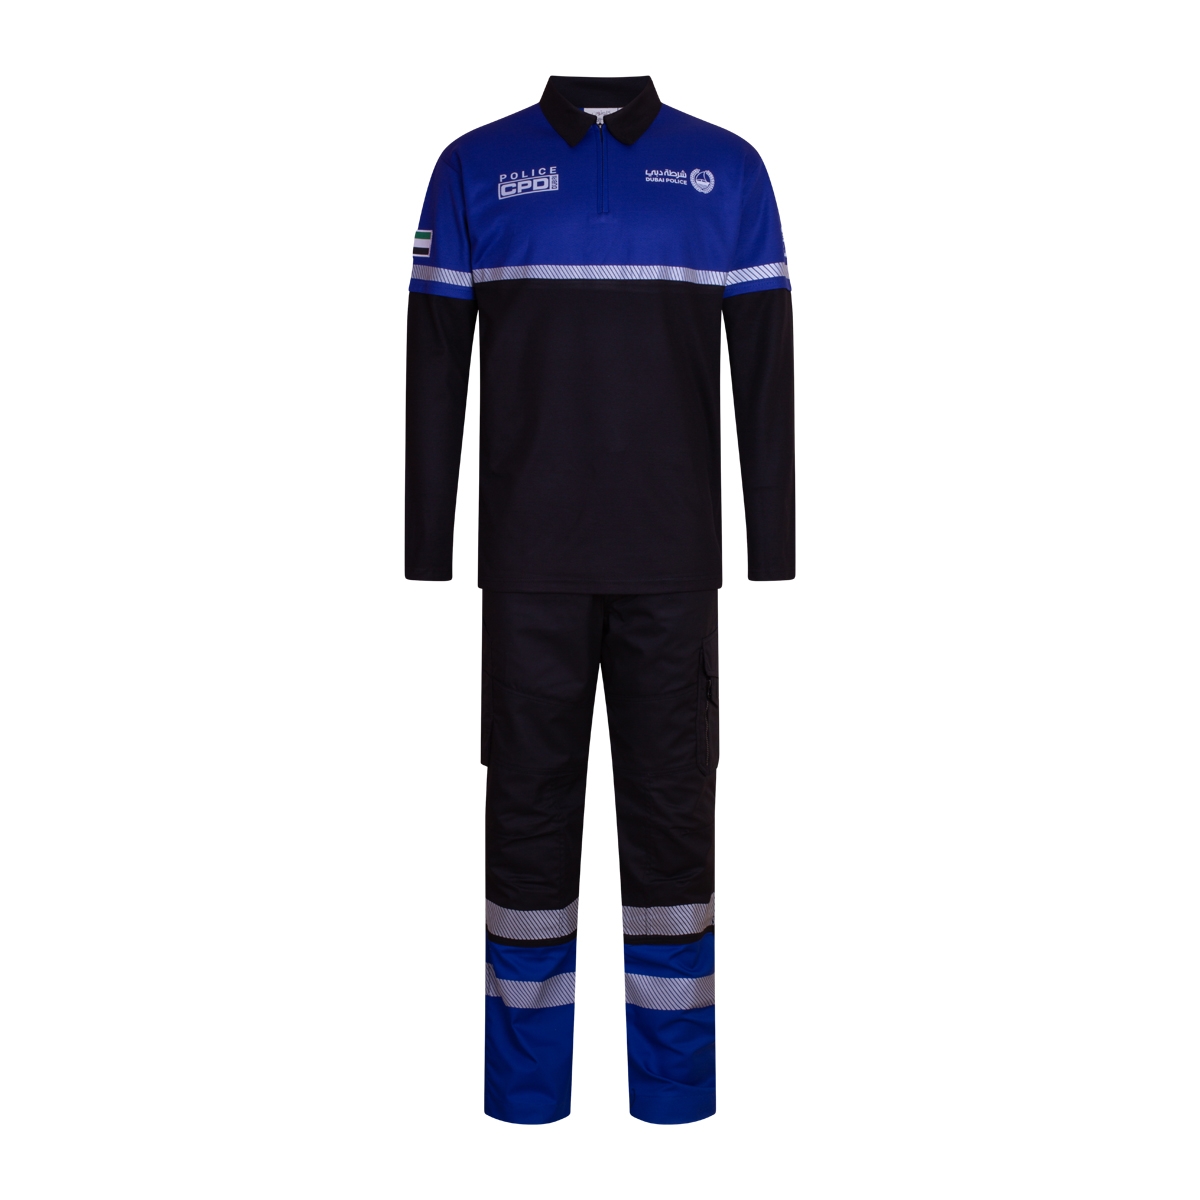 Police Search and rescue Uniform2 front